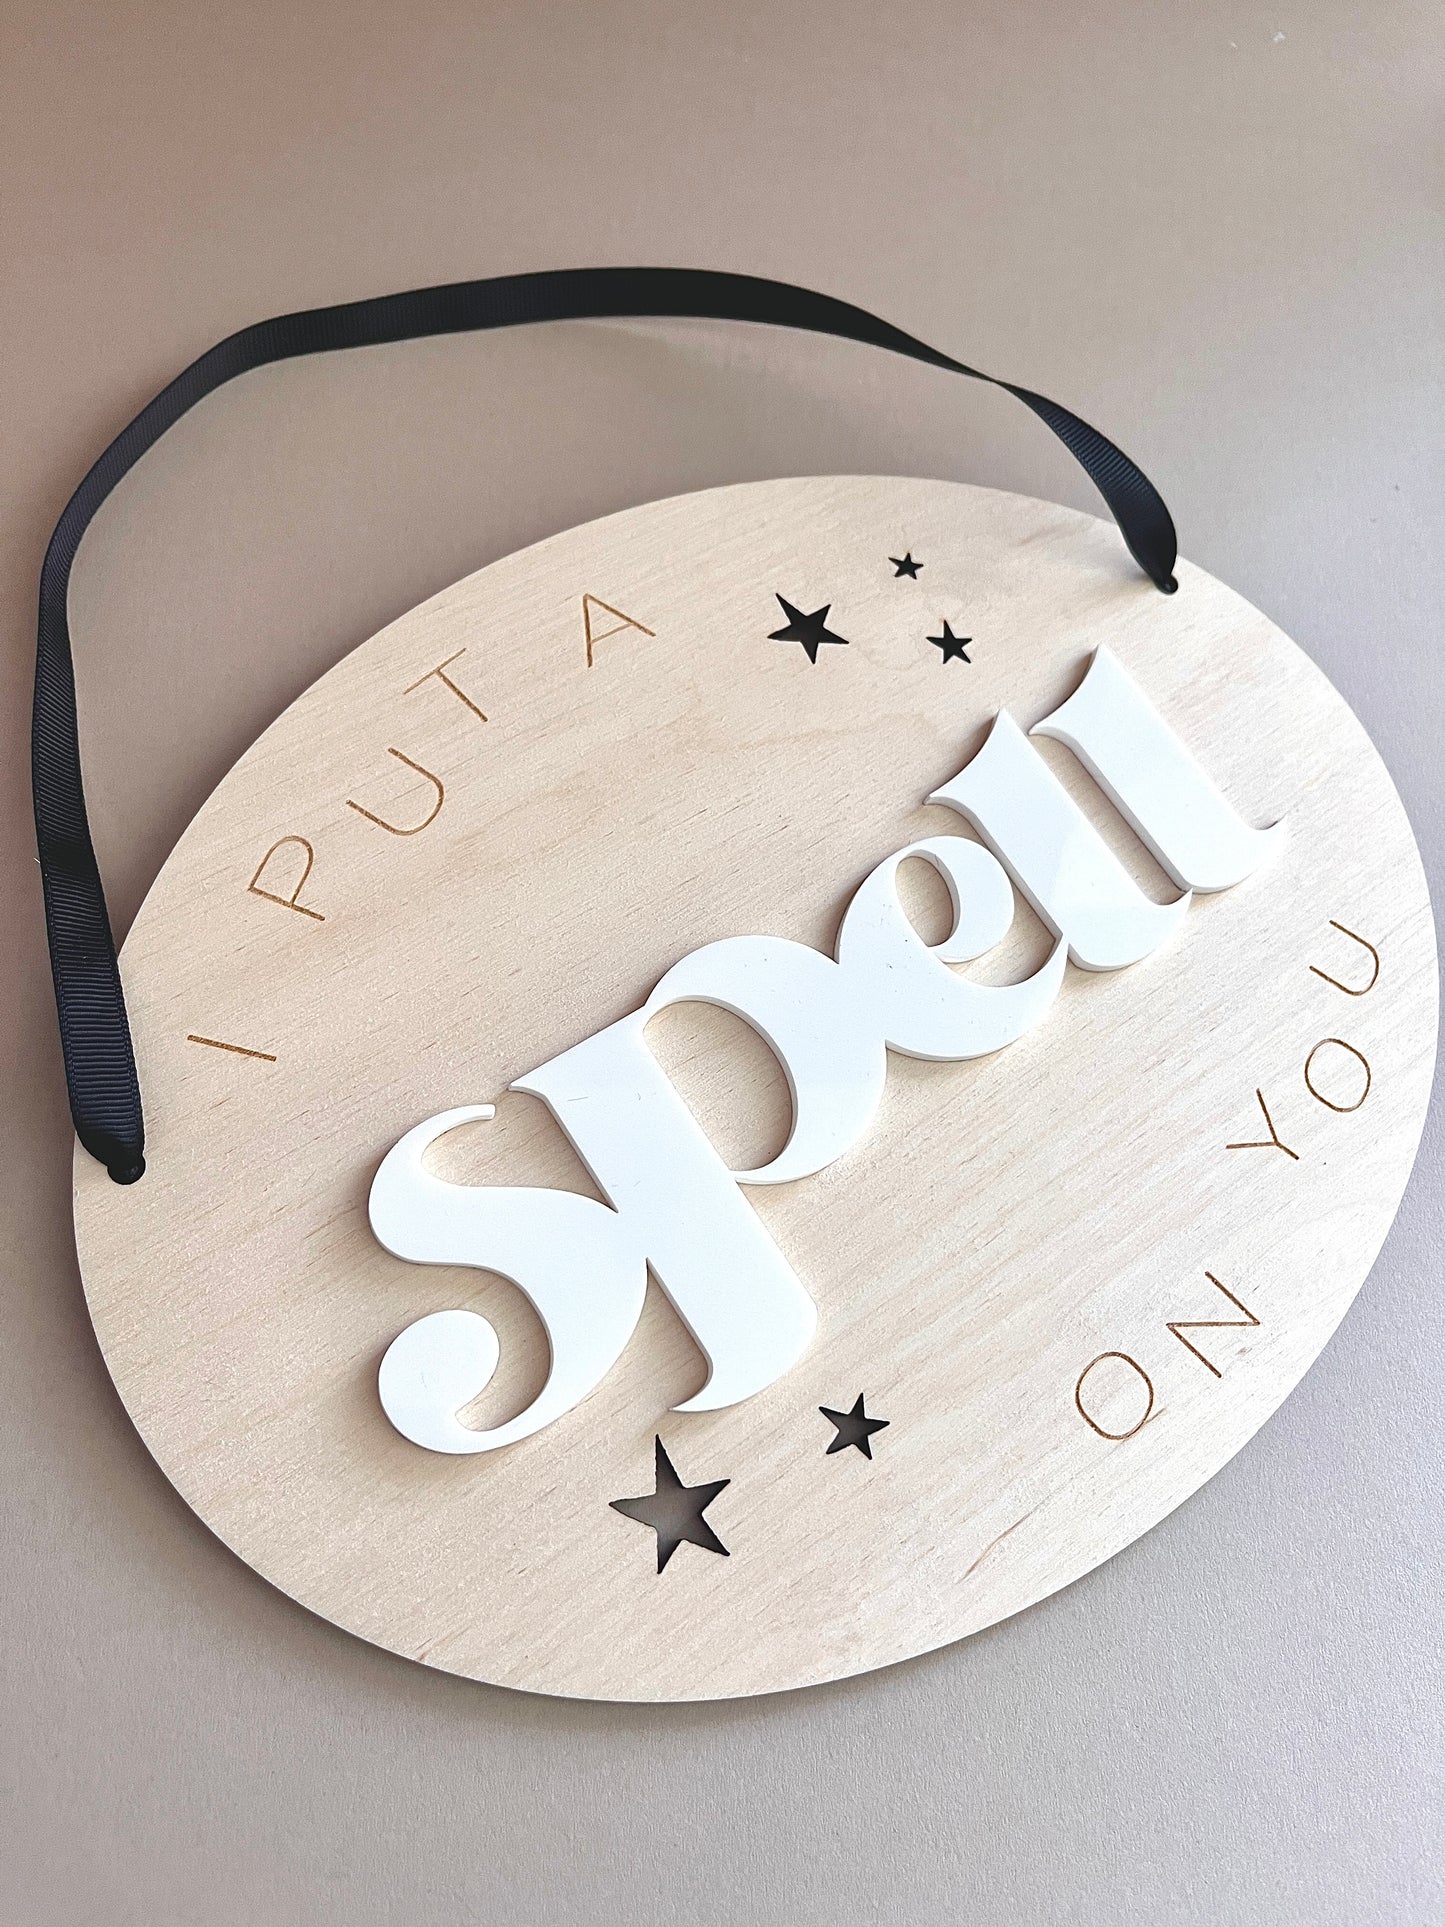 I put a spell on you wall decor, wooden flag, Halloween decor